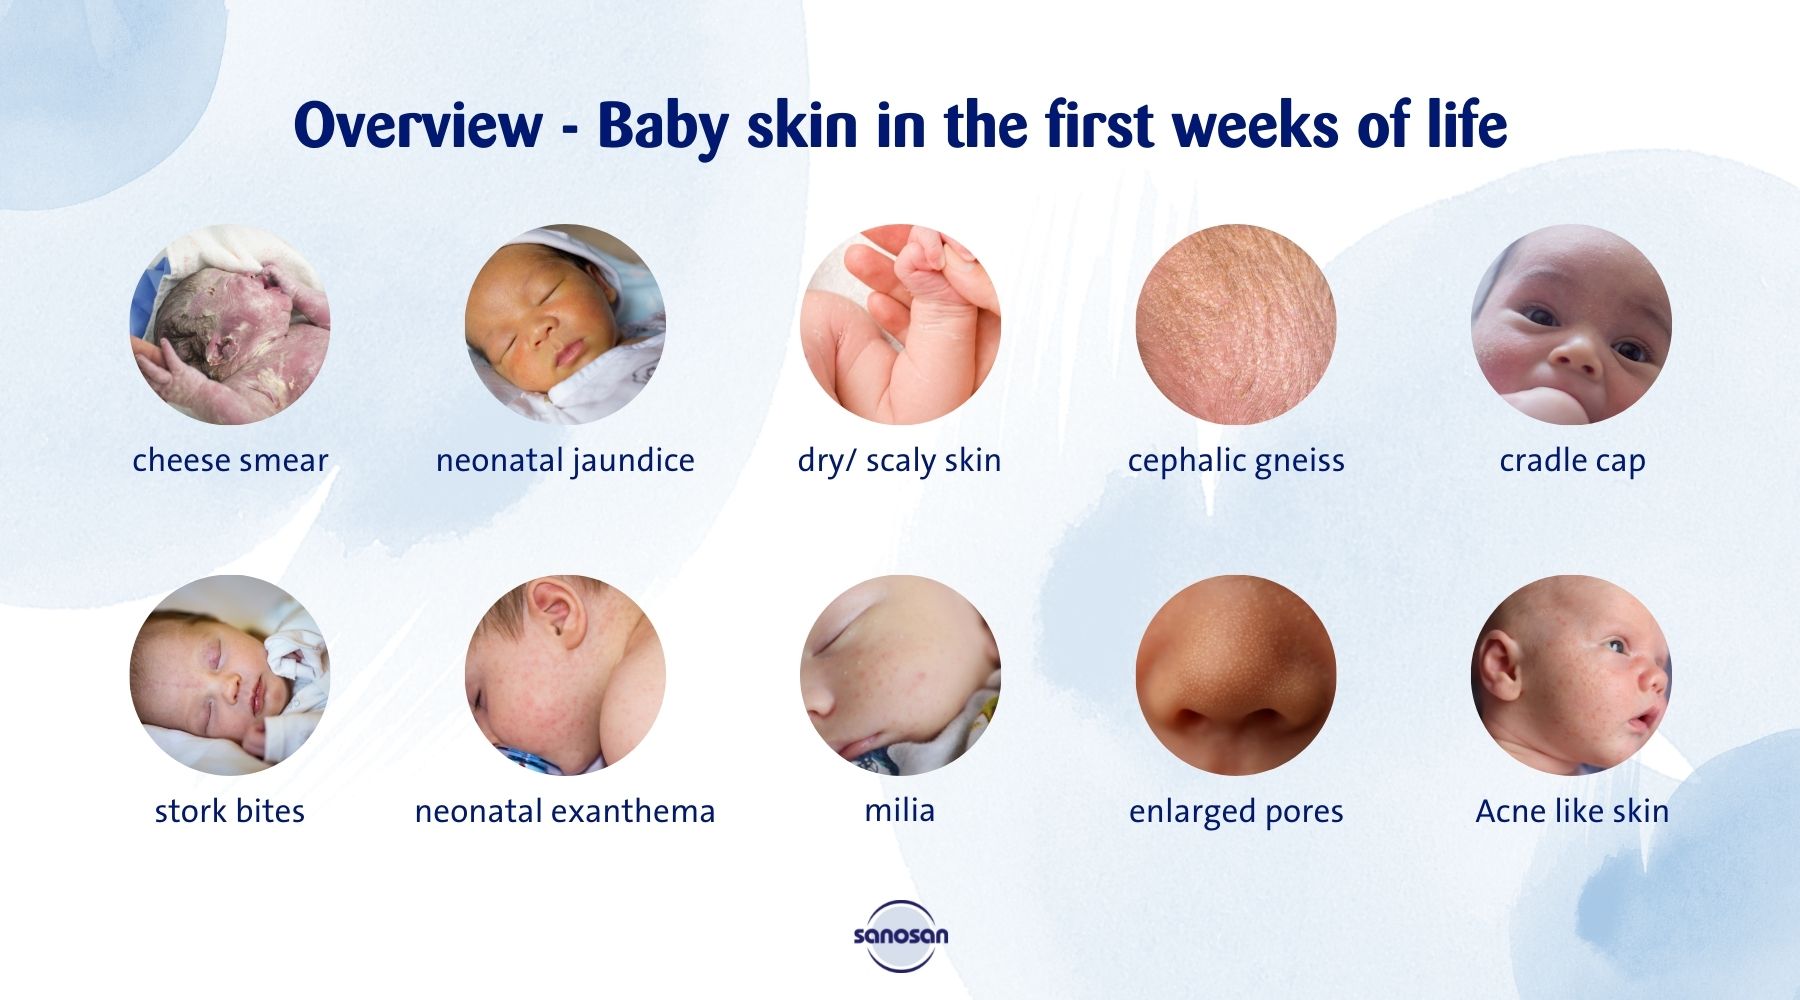 Overview - Baby skin in the first weeks of life infographic